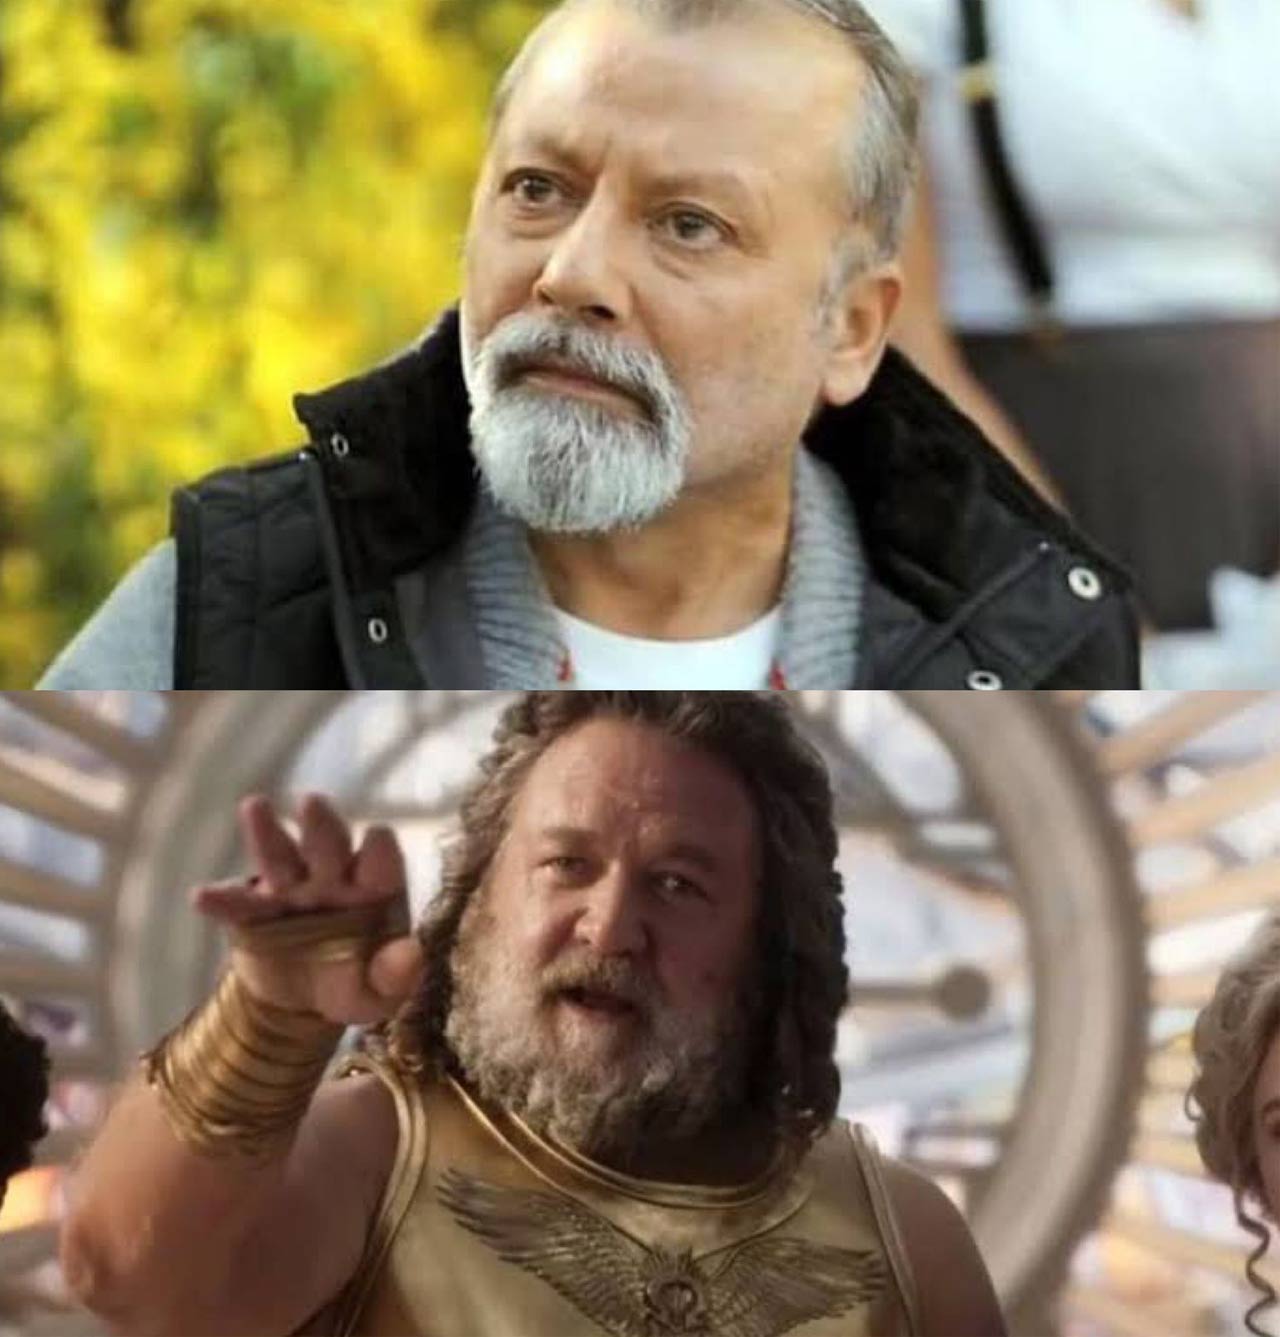 Zeus is the head of all the Gods in Greek mythology, he’s extremely strong-headed and determined. Pankaj Kapur is perfect to play the part of Zeus as he’s known for excelling in his craft and portraying characters that are powerful, egotistical and larger than life